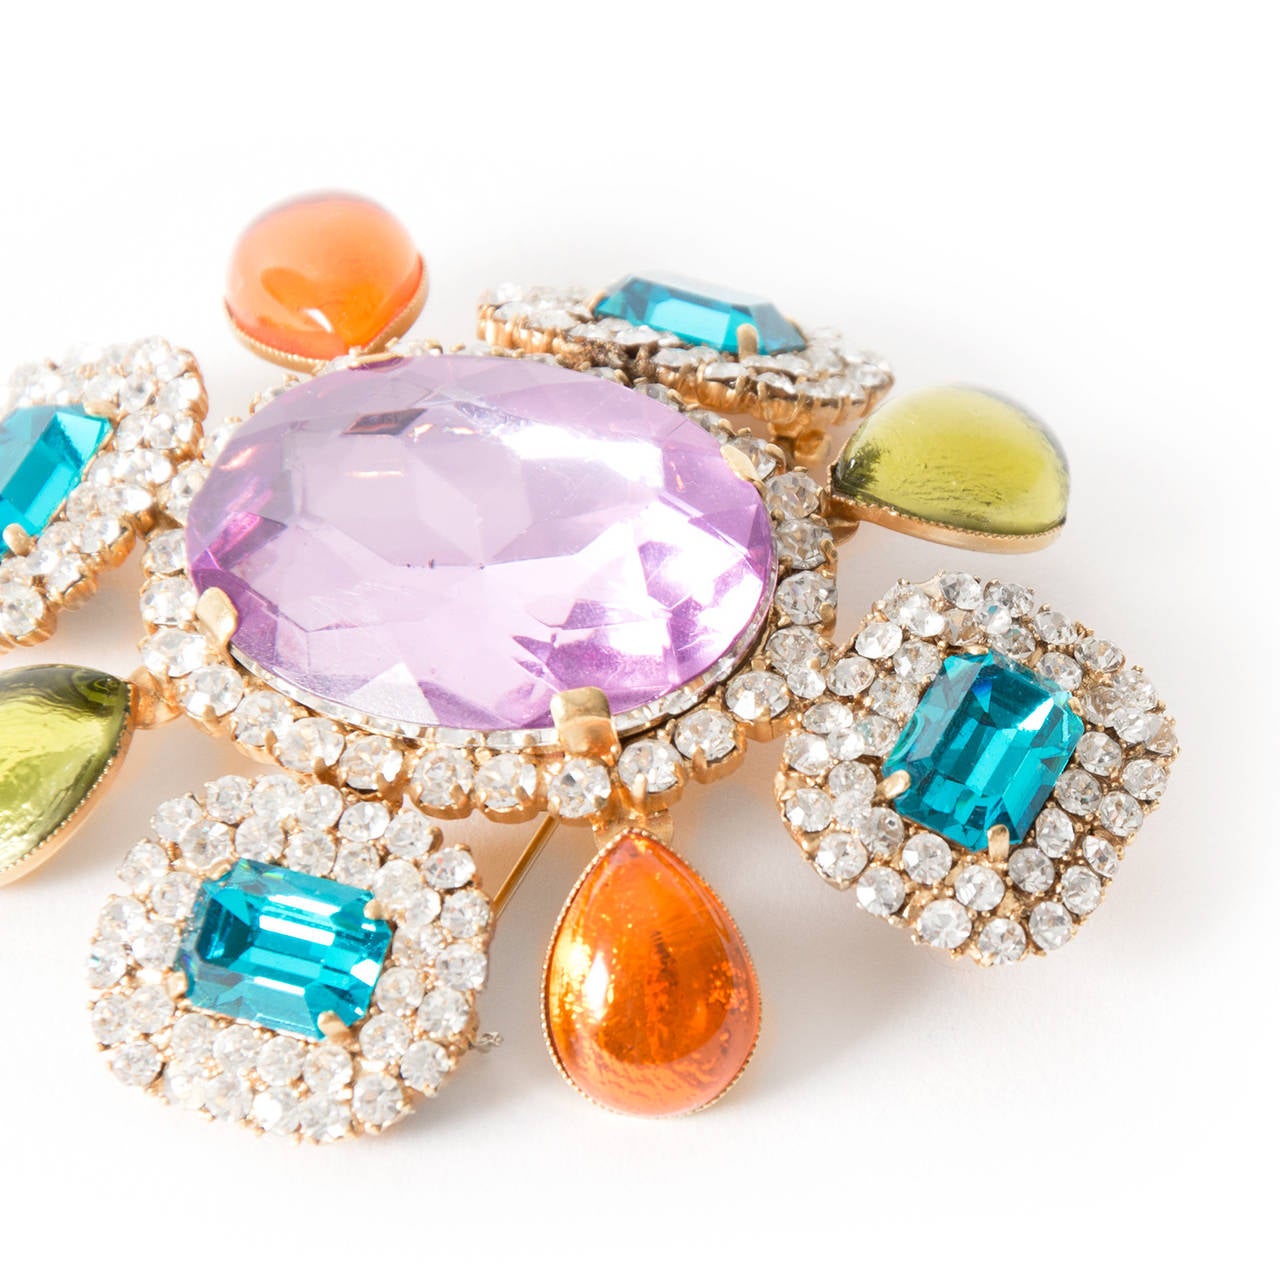 Chanel Multicolor Brooch

Chanel Multicolor Brooch Bold and beautiful, this design from Chanel has a design that is absolutely breathtaking!

Detailed with vibrant orange and green glasstones and purple, turquoise and white colored